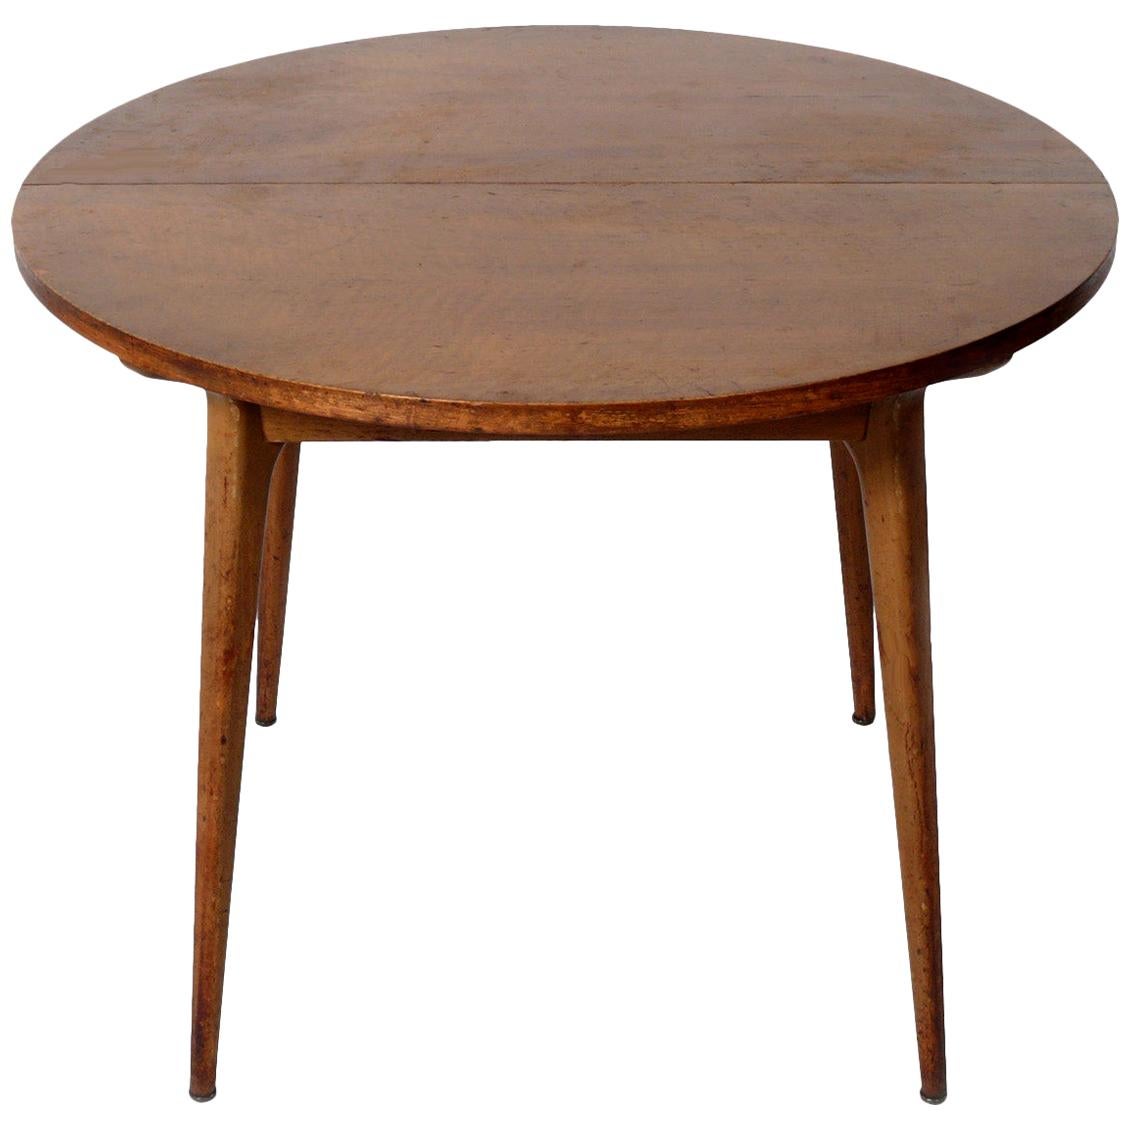 Italian Modern Dining Table by Bertha Schaefer for Singer and Sons